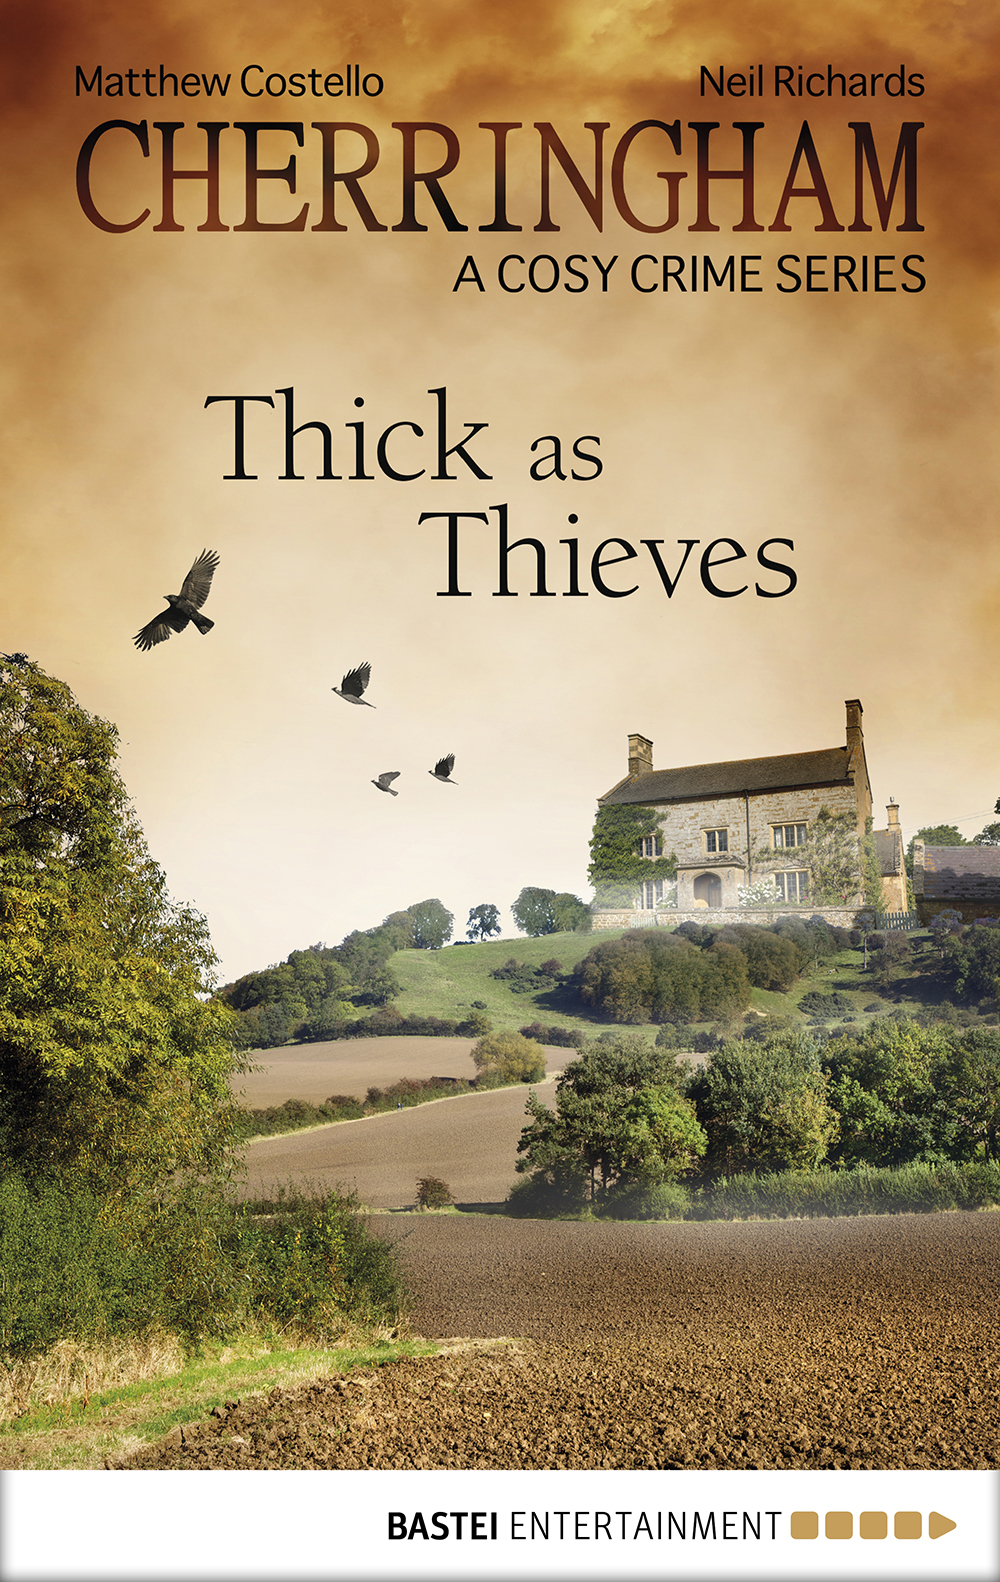 Cherringham--Thick as Thieves (2015) by Neil Richards